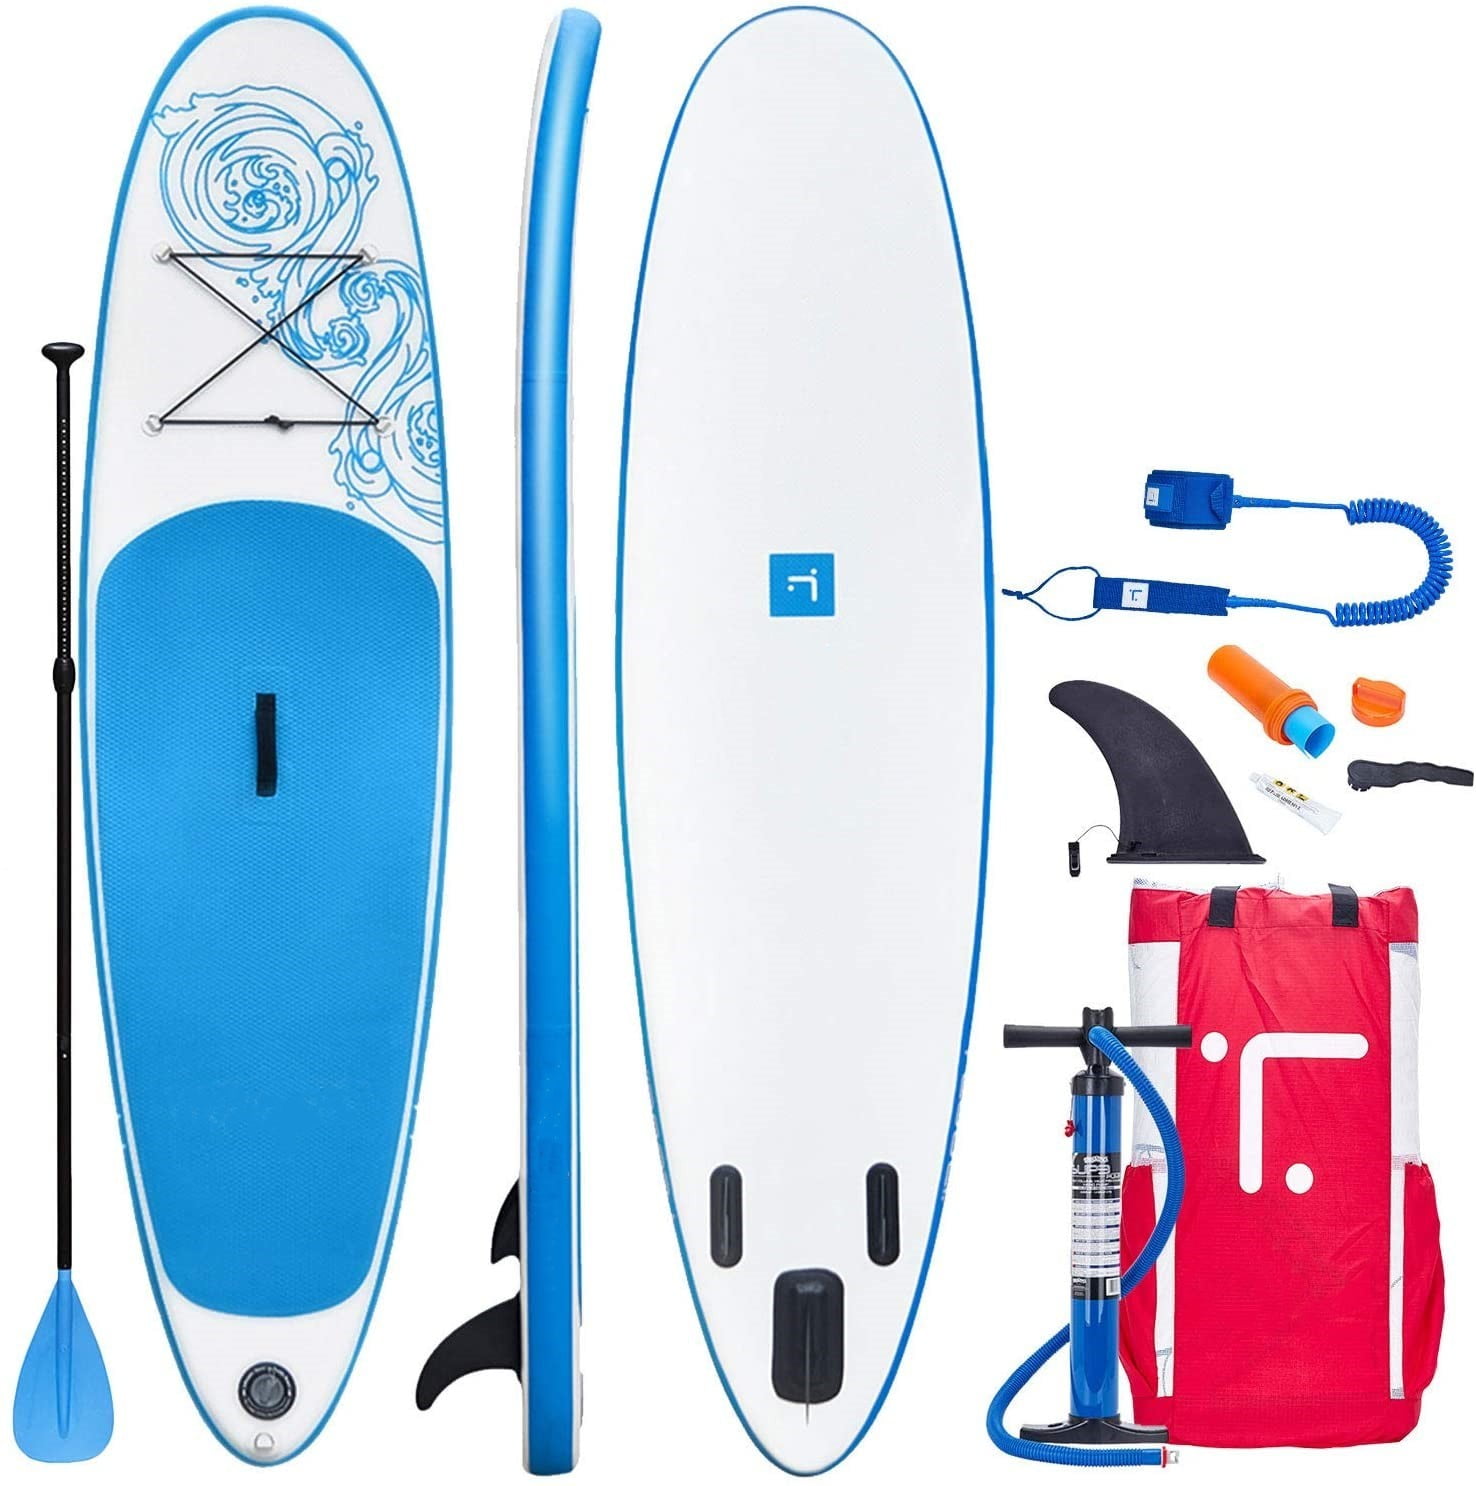 Optimum Inflatable Stand Up Paddle Boards with Premium SUP Paddle Board  Accessories, Wide Stable Design, Non-Slip Comfort Deck for All Skill Level  